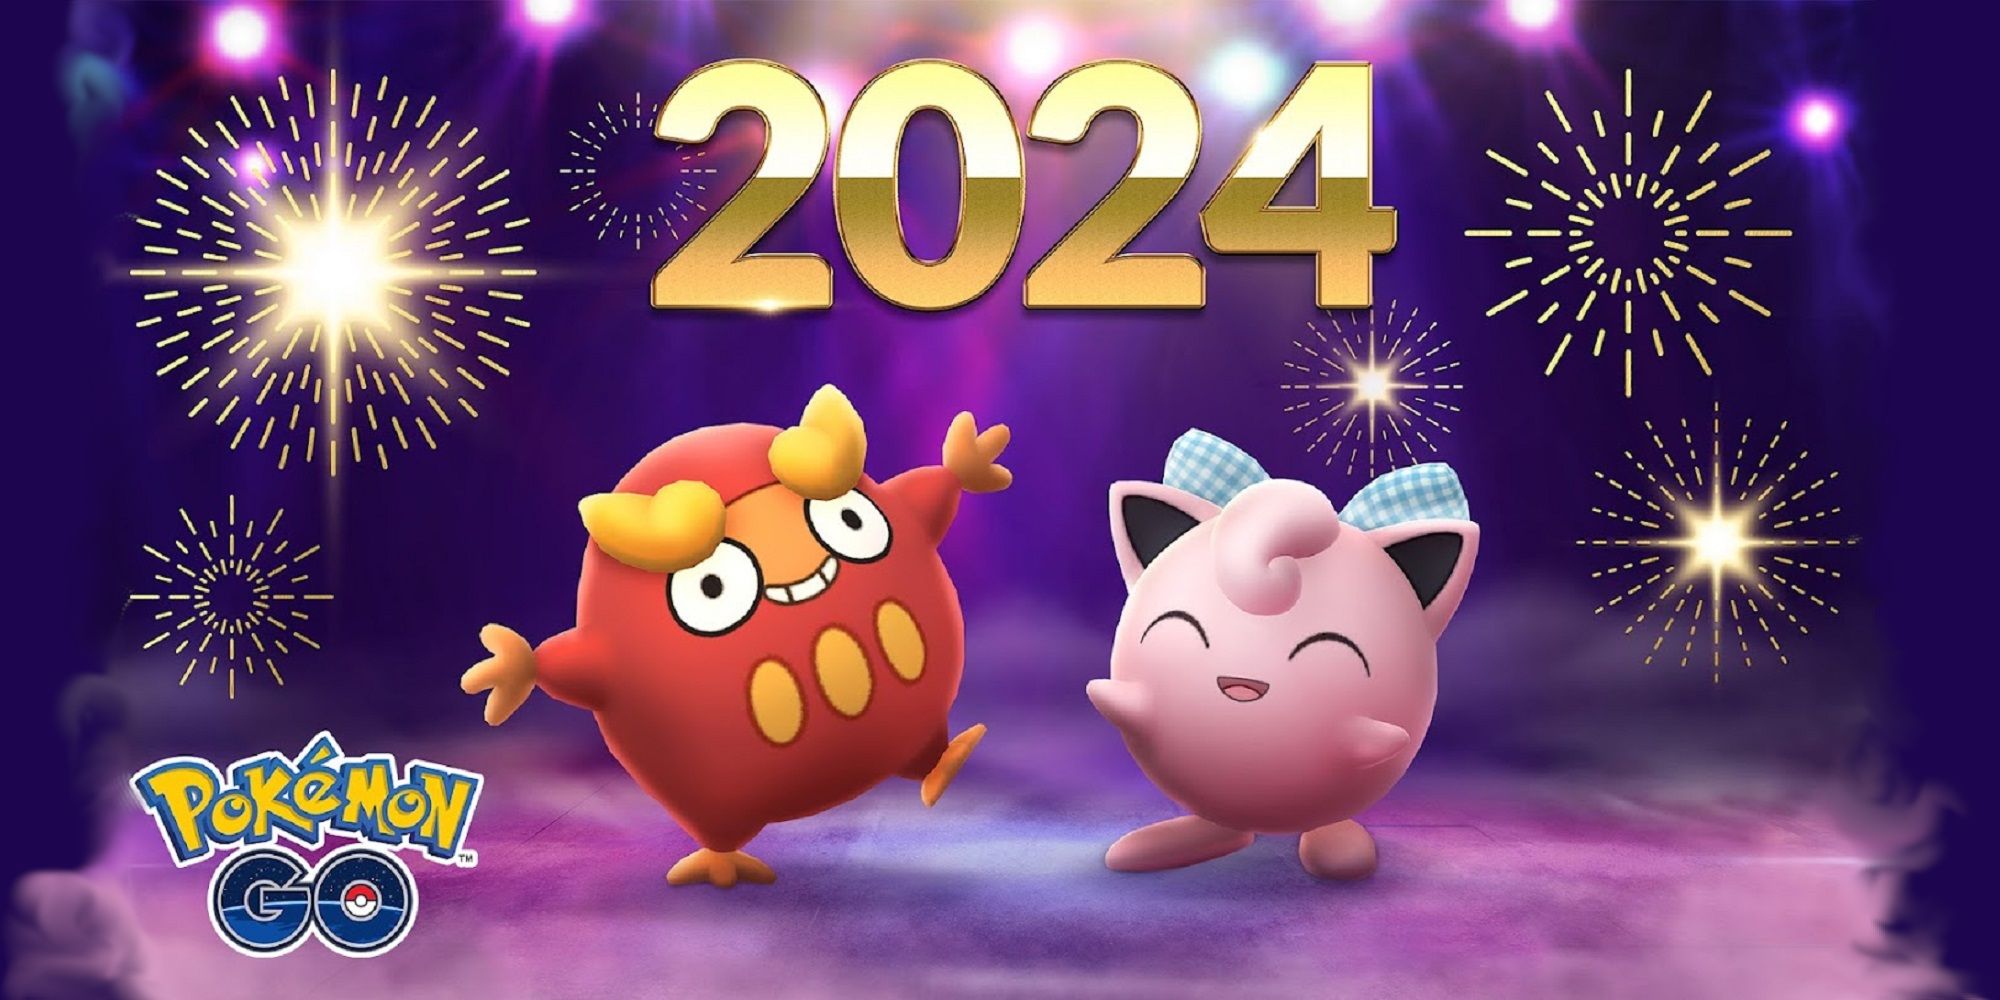 pokemon go darumaka and jigglypuff with 2024 and fireworks in the background